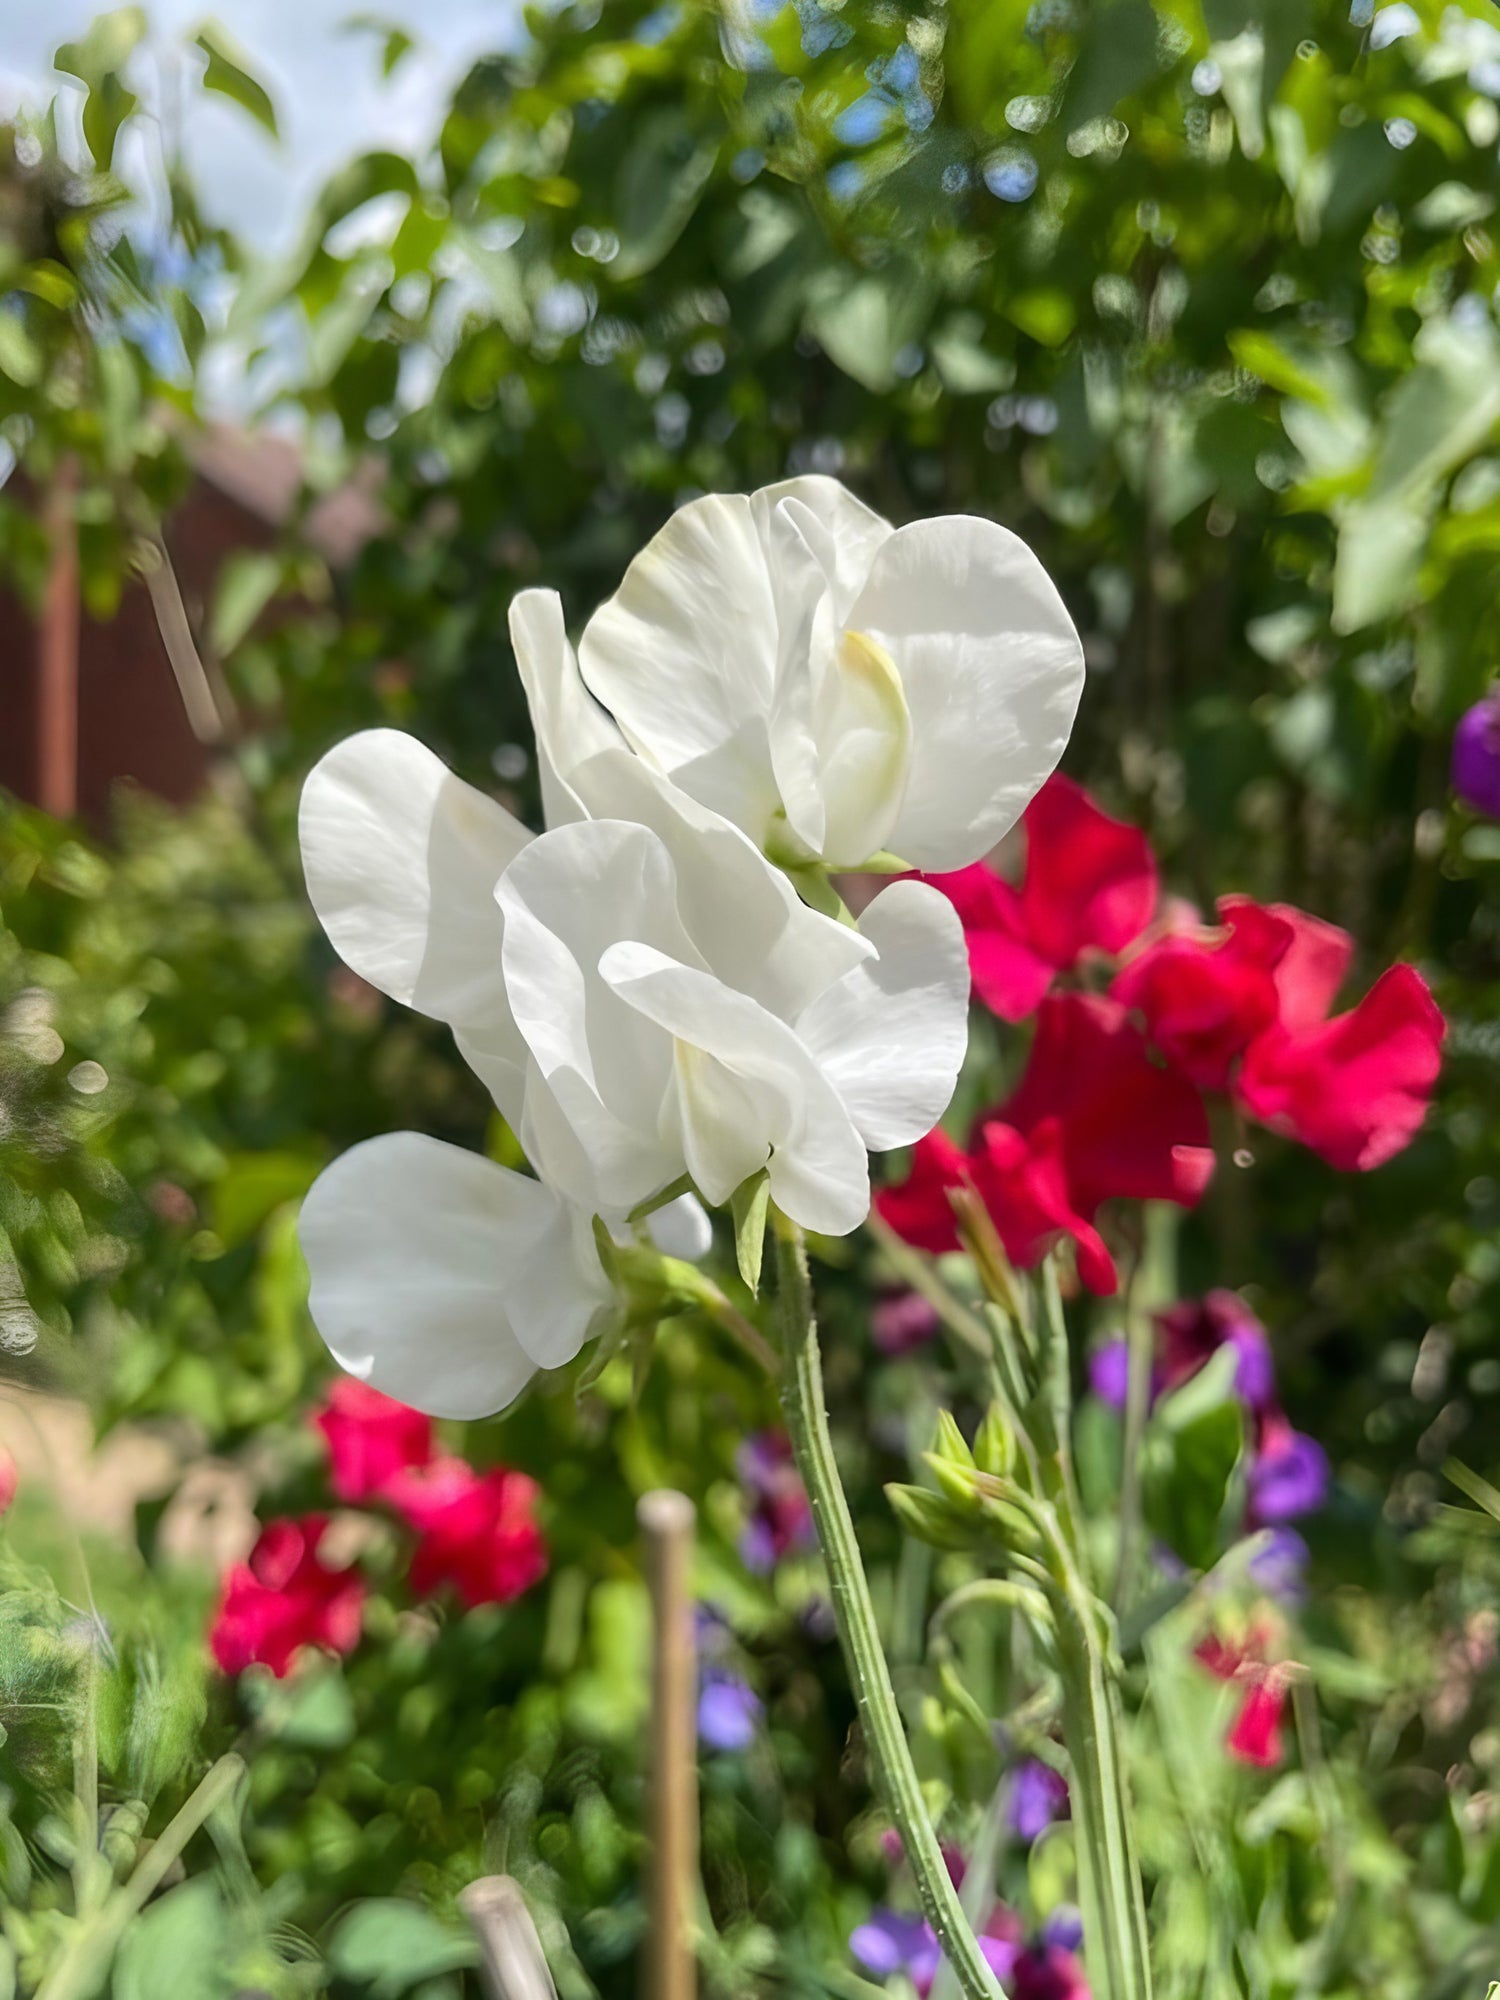 Assorted colors of Sweet Pea Spencer Swan Lake flowers including white, red, purple, and yellow